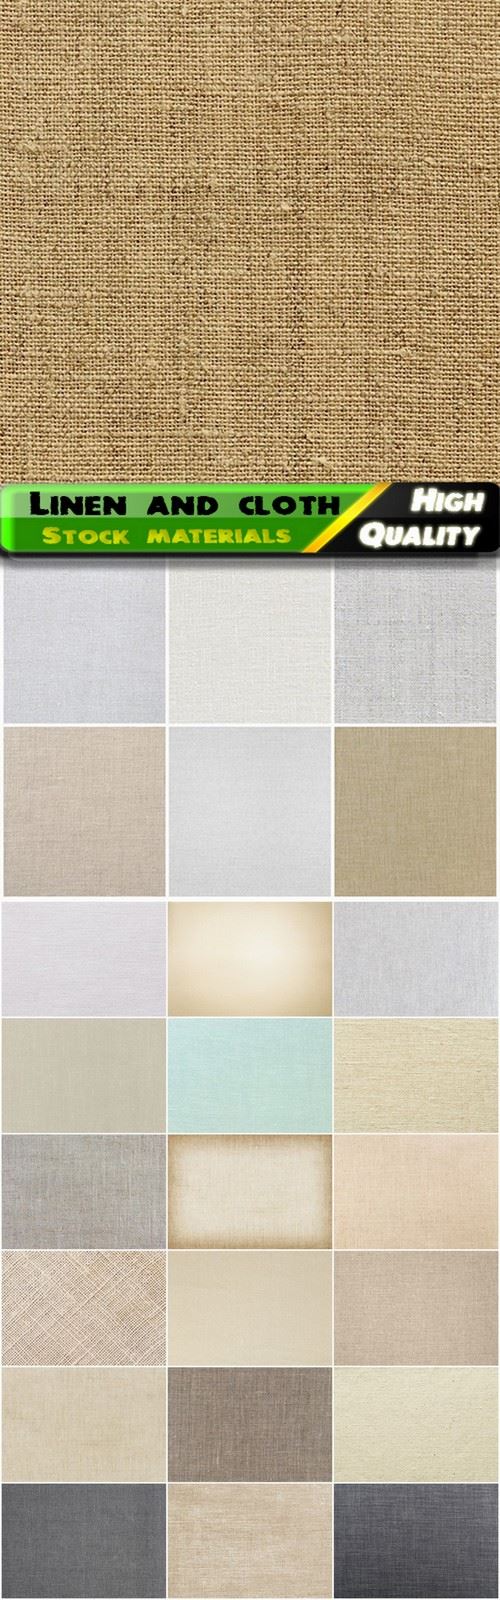 Background and texture of natural linen and cloth - 25 HQ Jpg